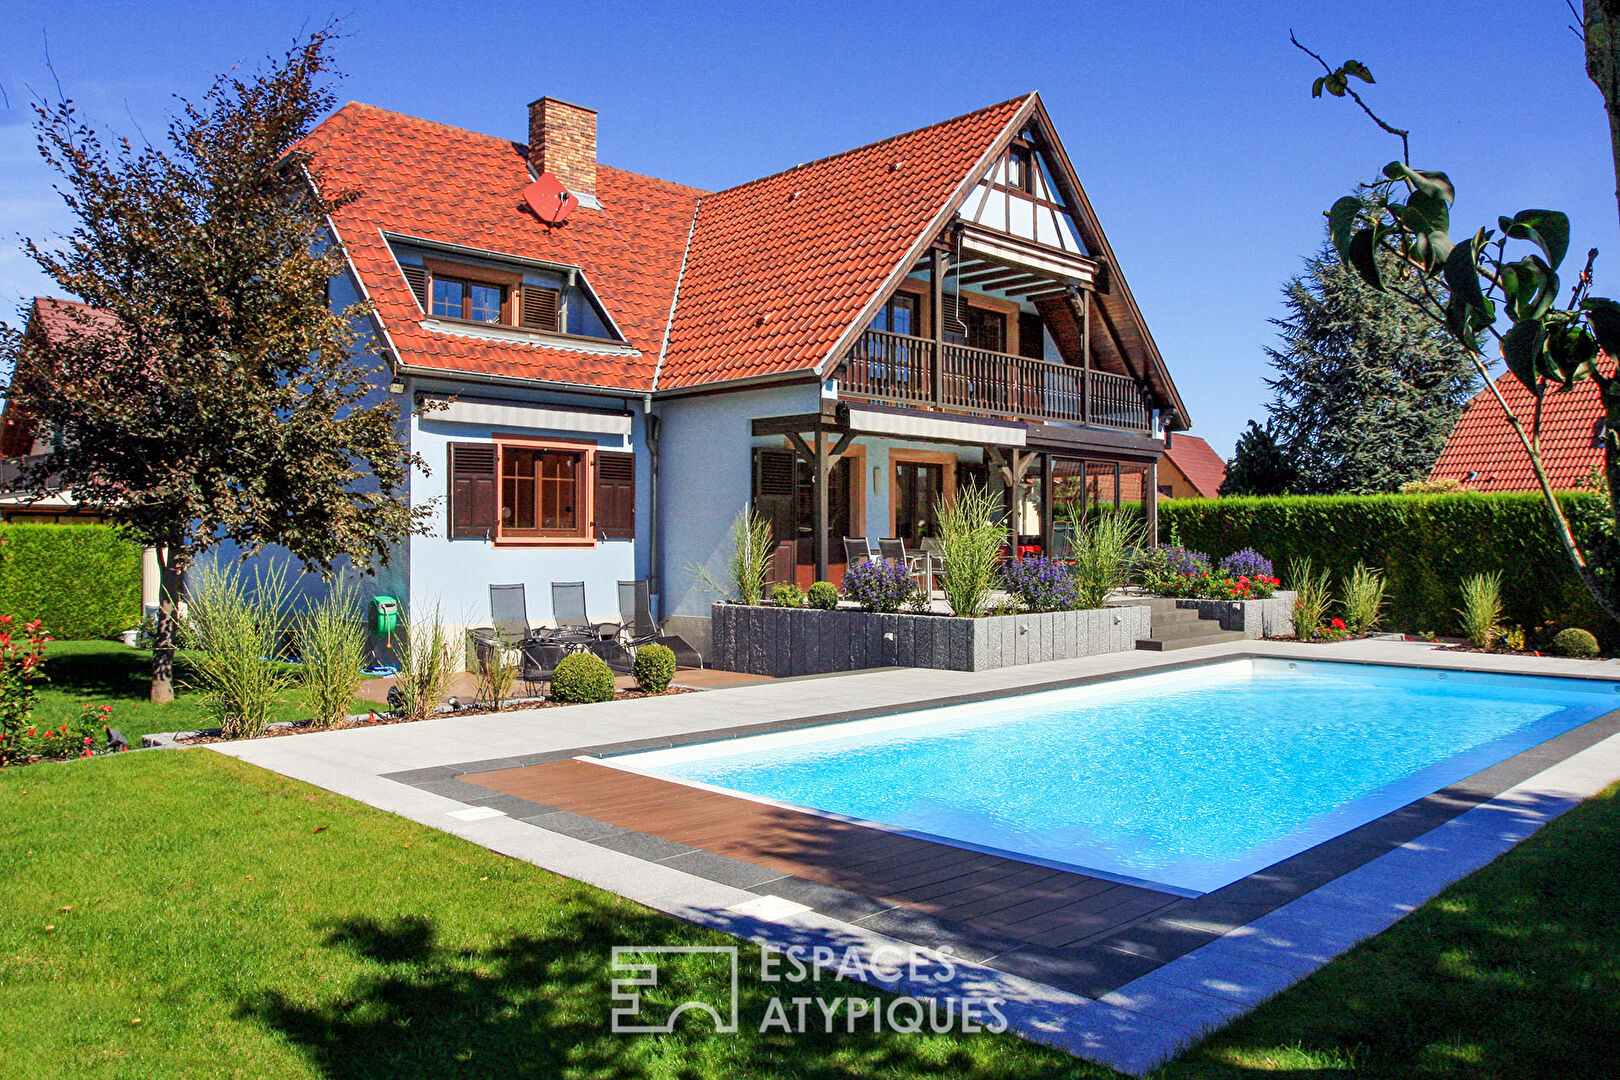 Family home with garden and swimming pool